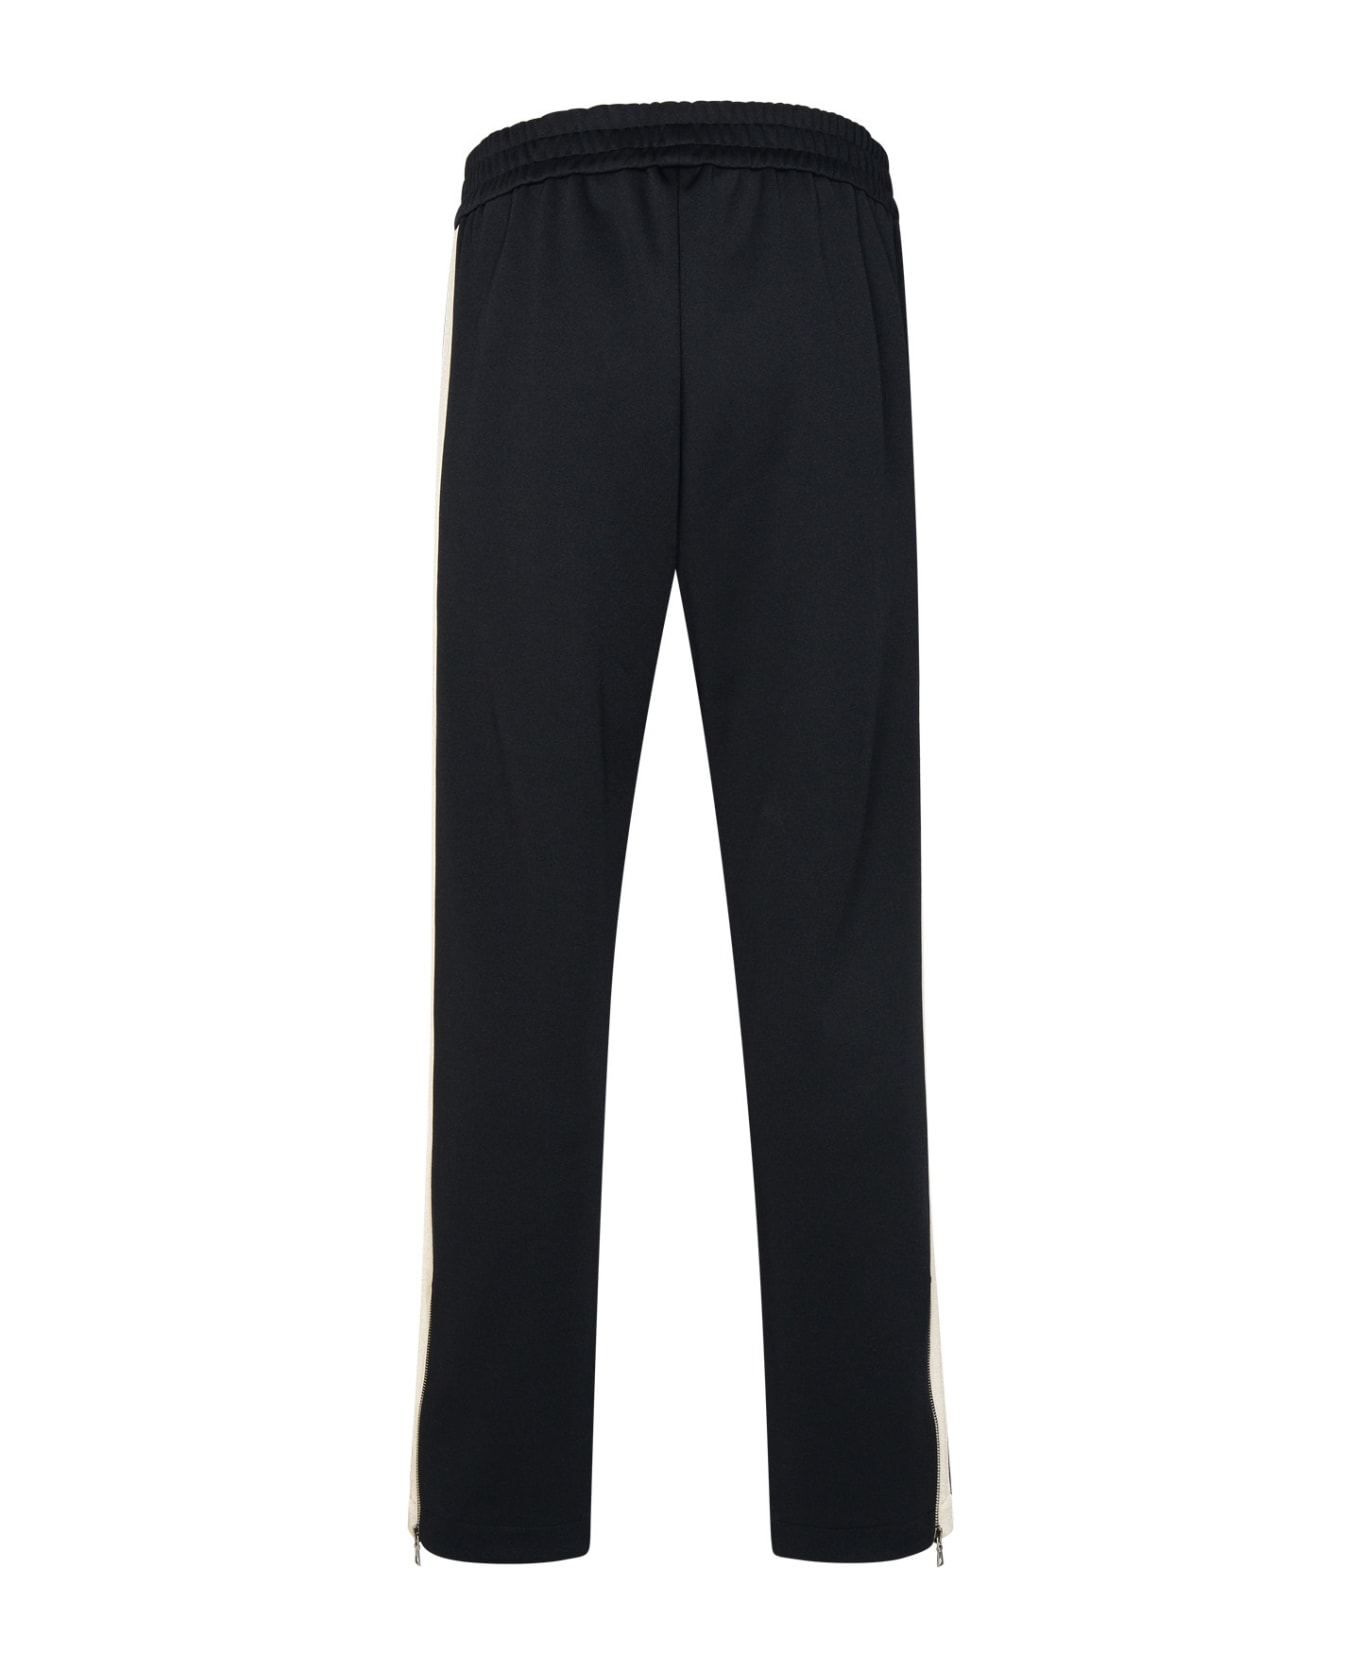 Palm Angels Track Pants In Technical Fabric - Black ボトムス